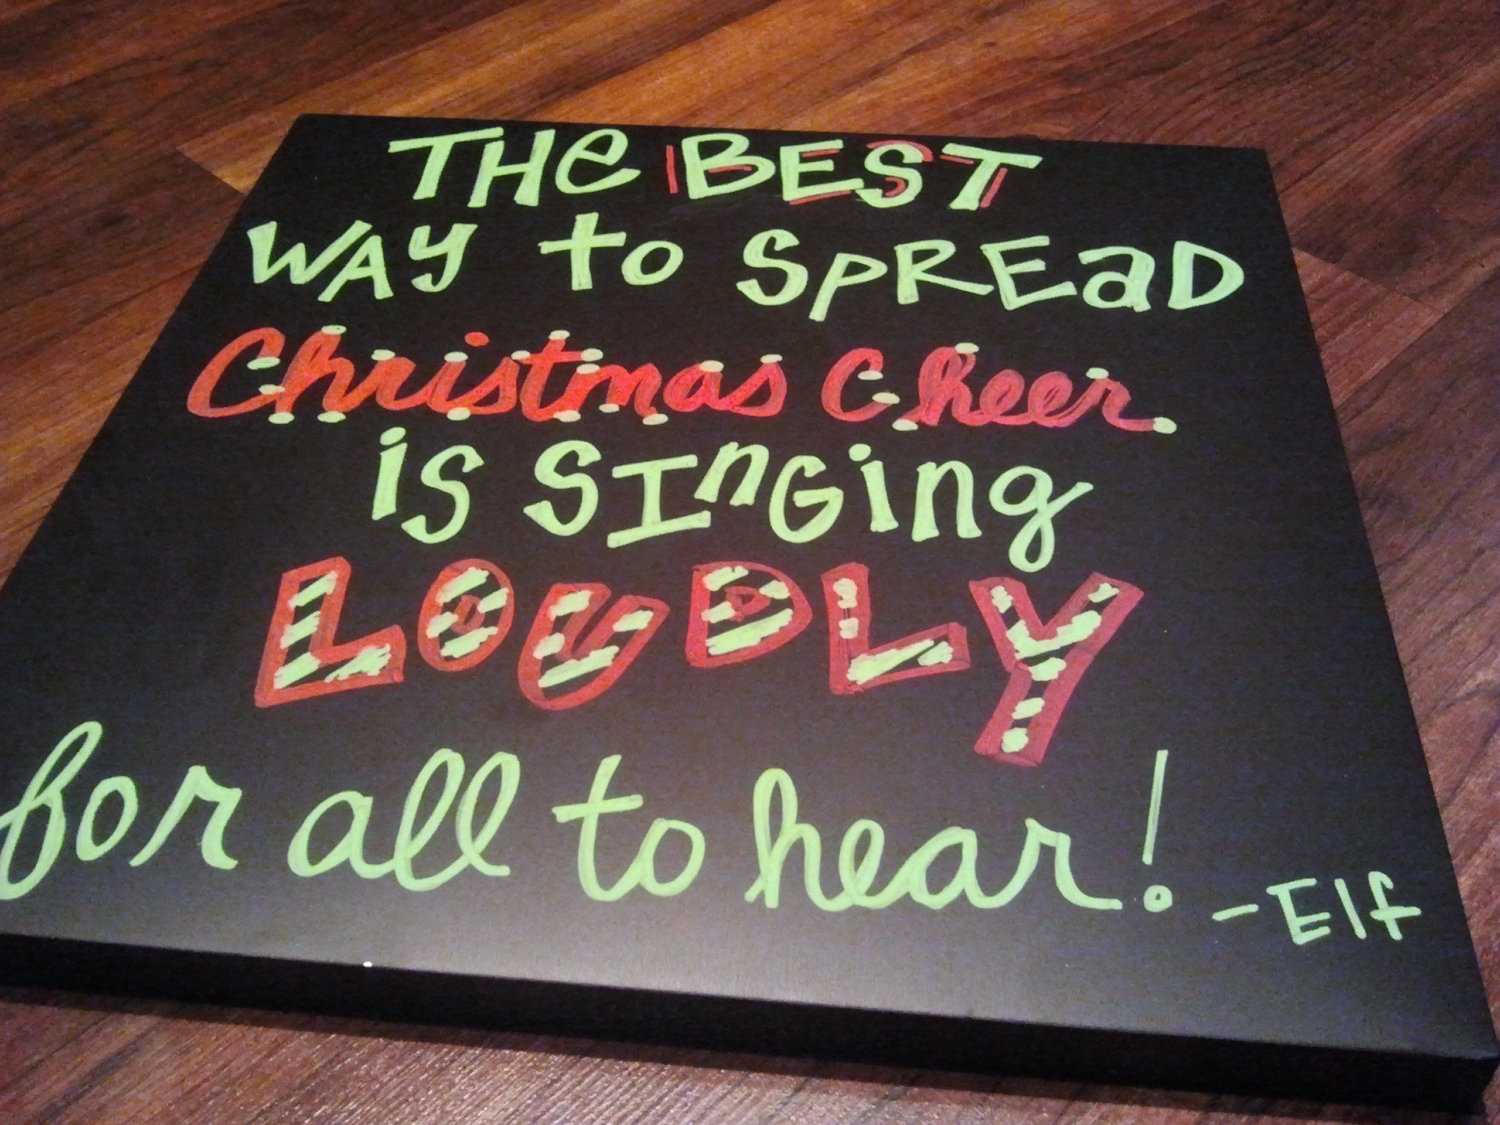 Holiday Cheer Quotes. QuotesGram